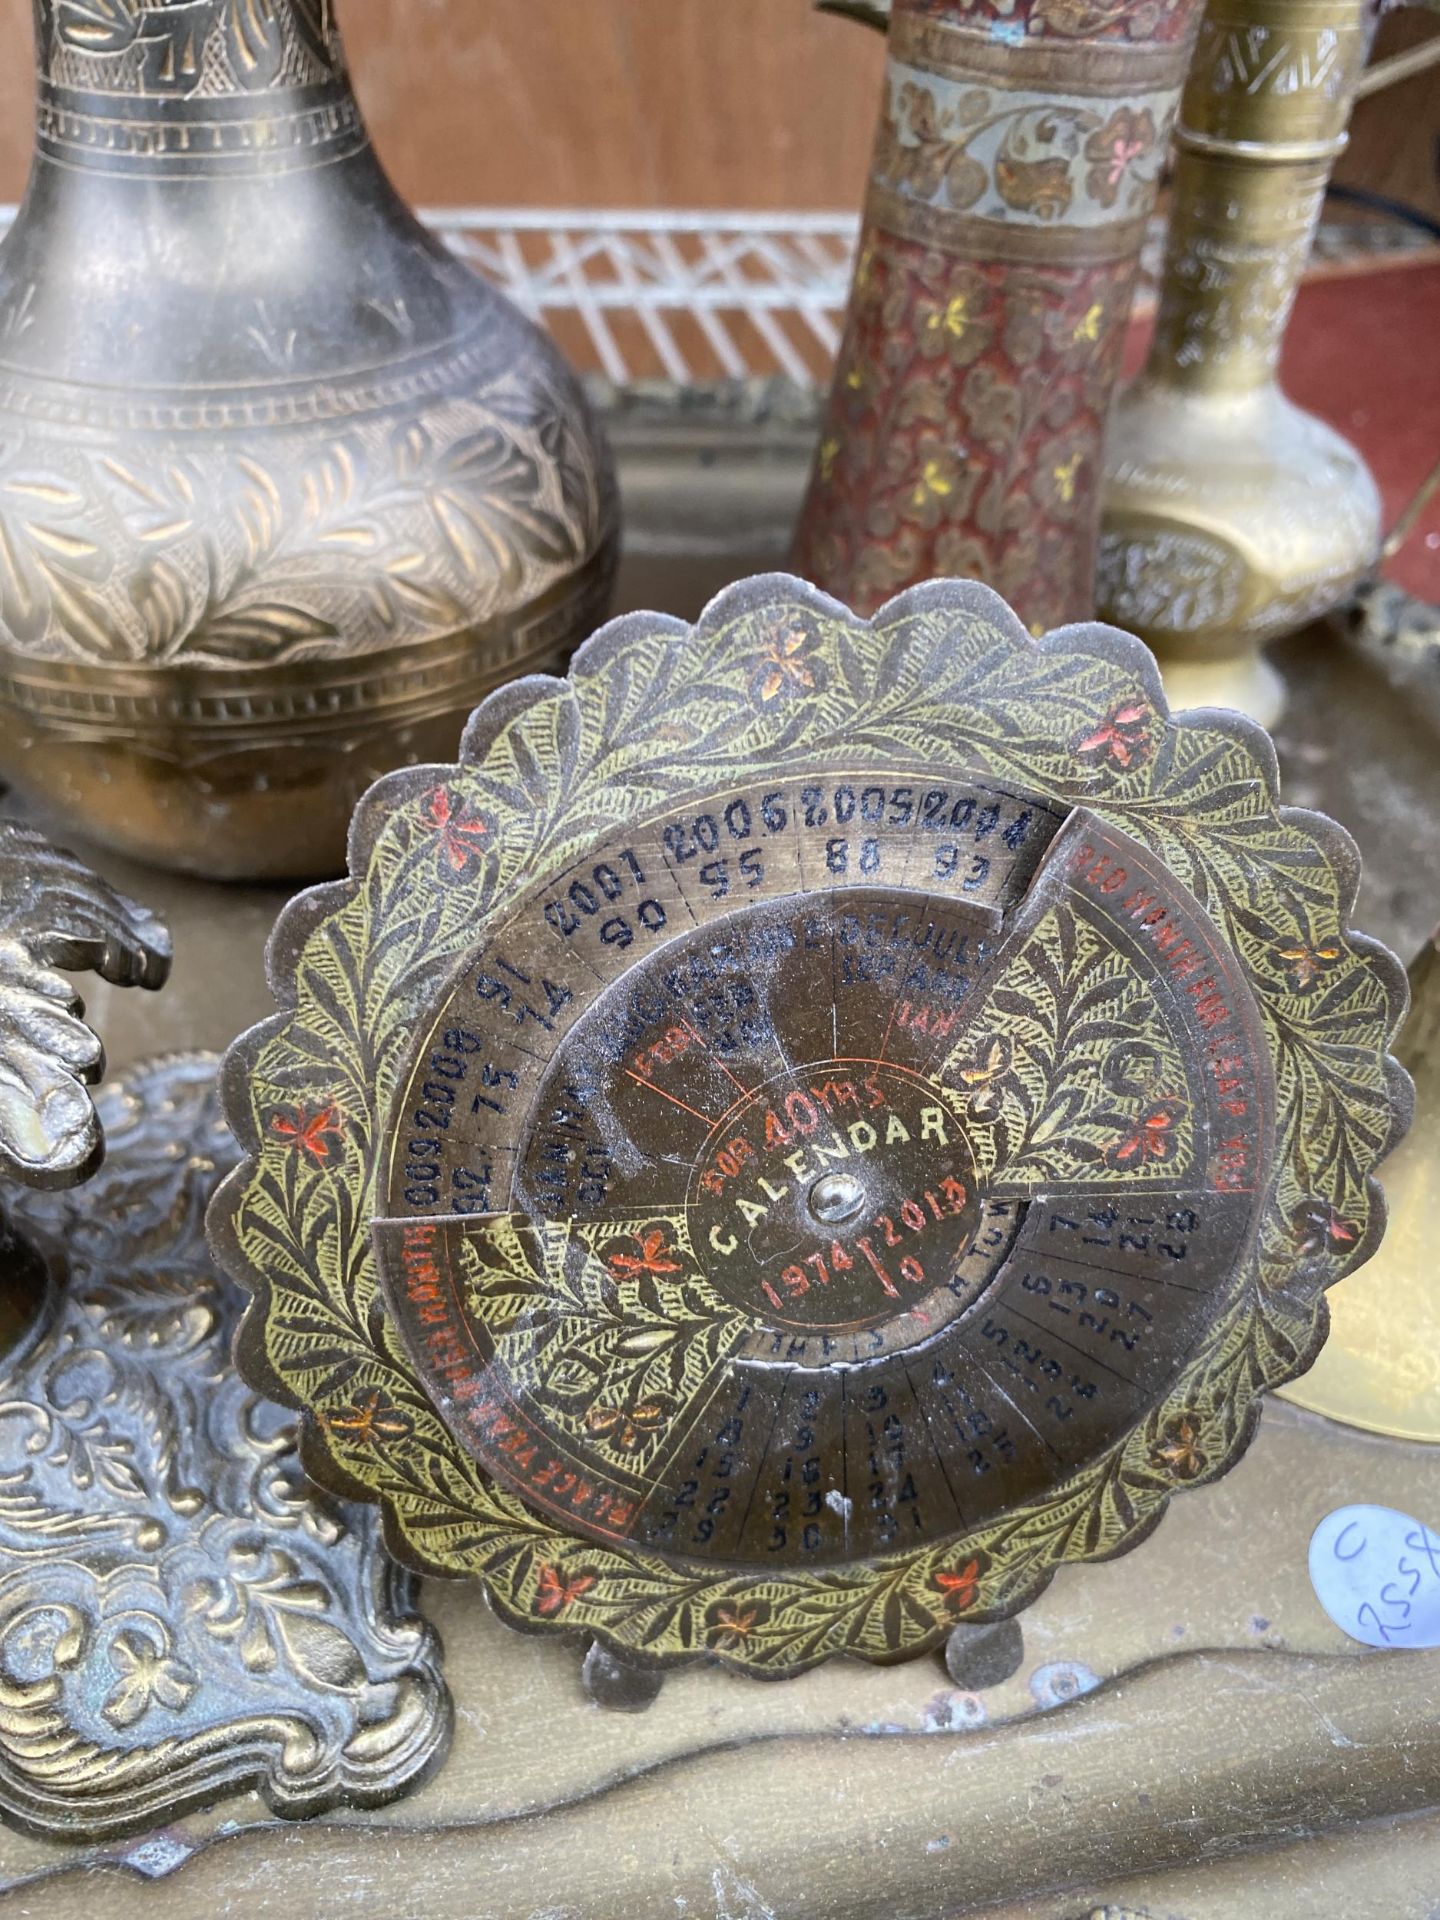 AN ASSORTMENT OF VINTAGE AND DECORATIVE BRASS WARE TO INCLUDE A TRAY, CANDLESTICKS AND CLOISONNE - Image 7 of 9